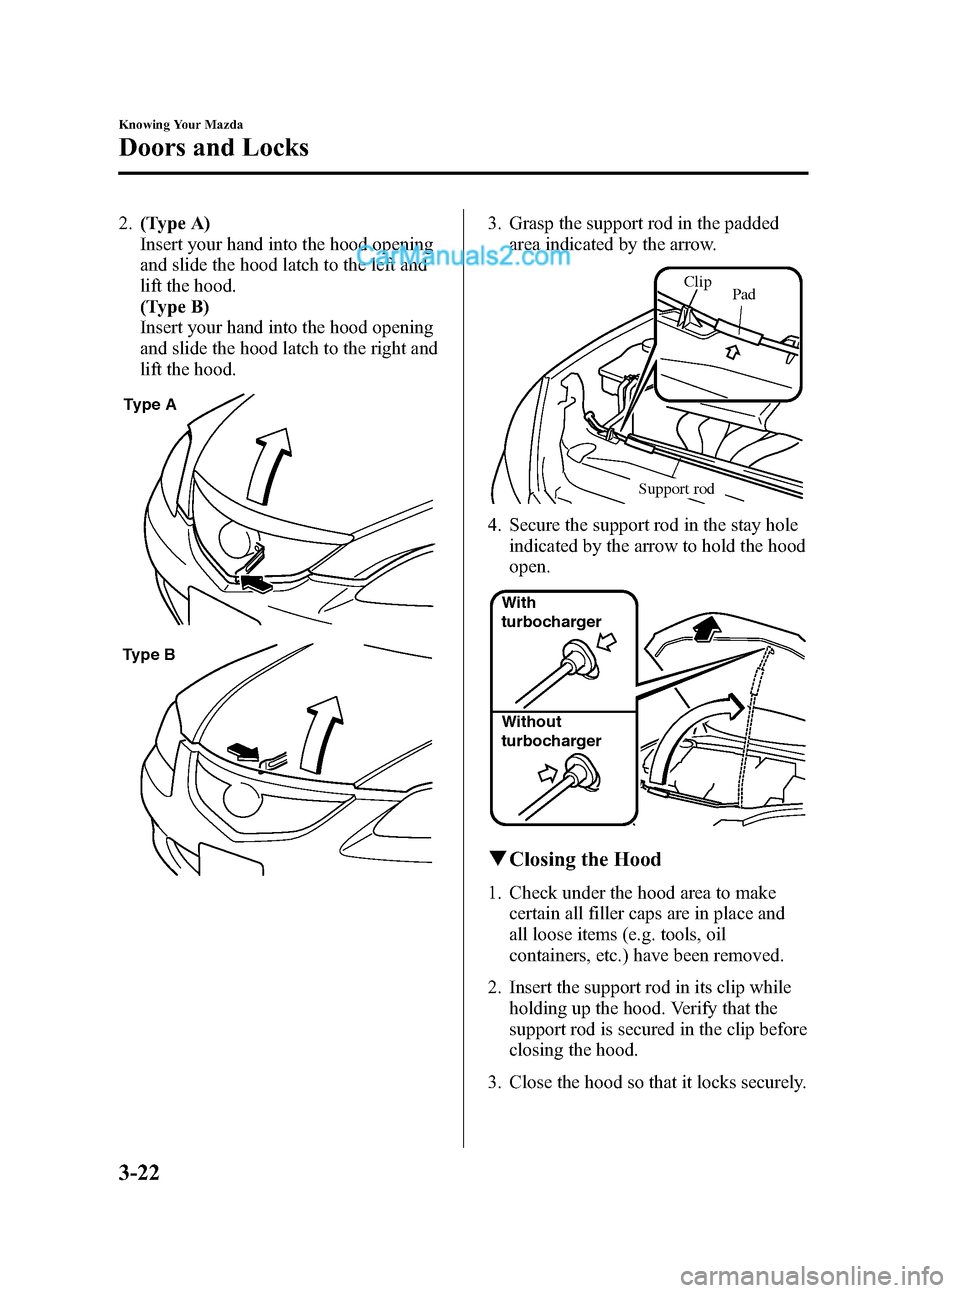 MAZDA MODEL MAZDASPEED 3 2008  Owners Manual (in English) Black plate (94,1)
2.(Type A)
Insert your hand into the hood opening
and slide the hood latch to the left and
lift the hood.
(Type B)
Insert your hand into the hood opening
and slide the hood latch to